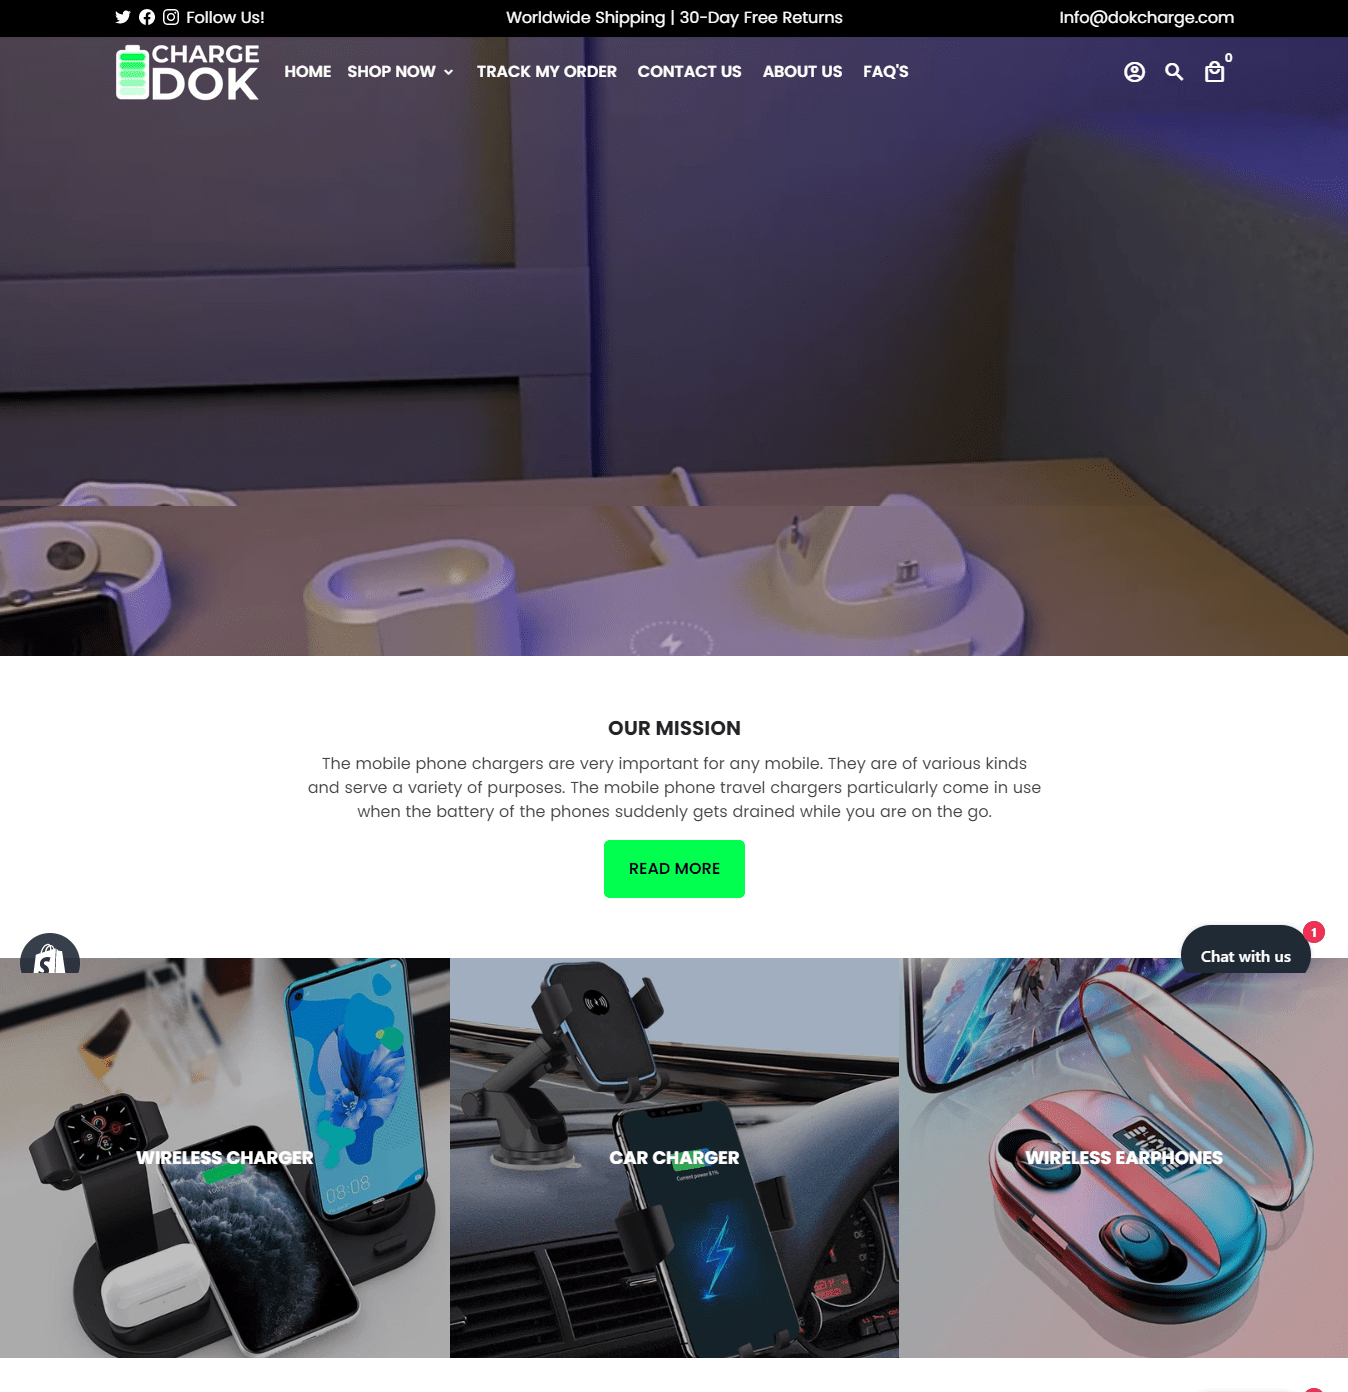 DokCharge ( Wireless Charger & Earphones Store)